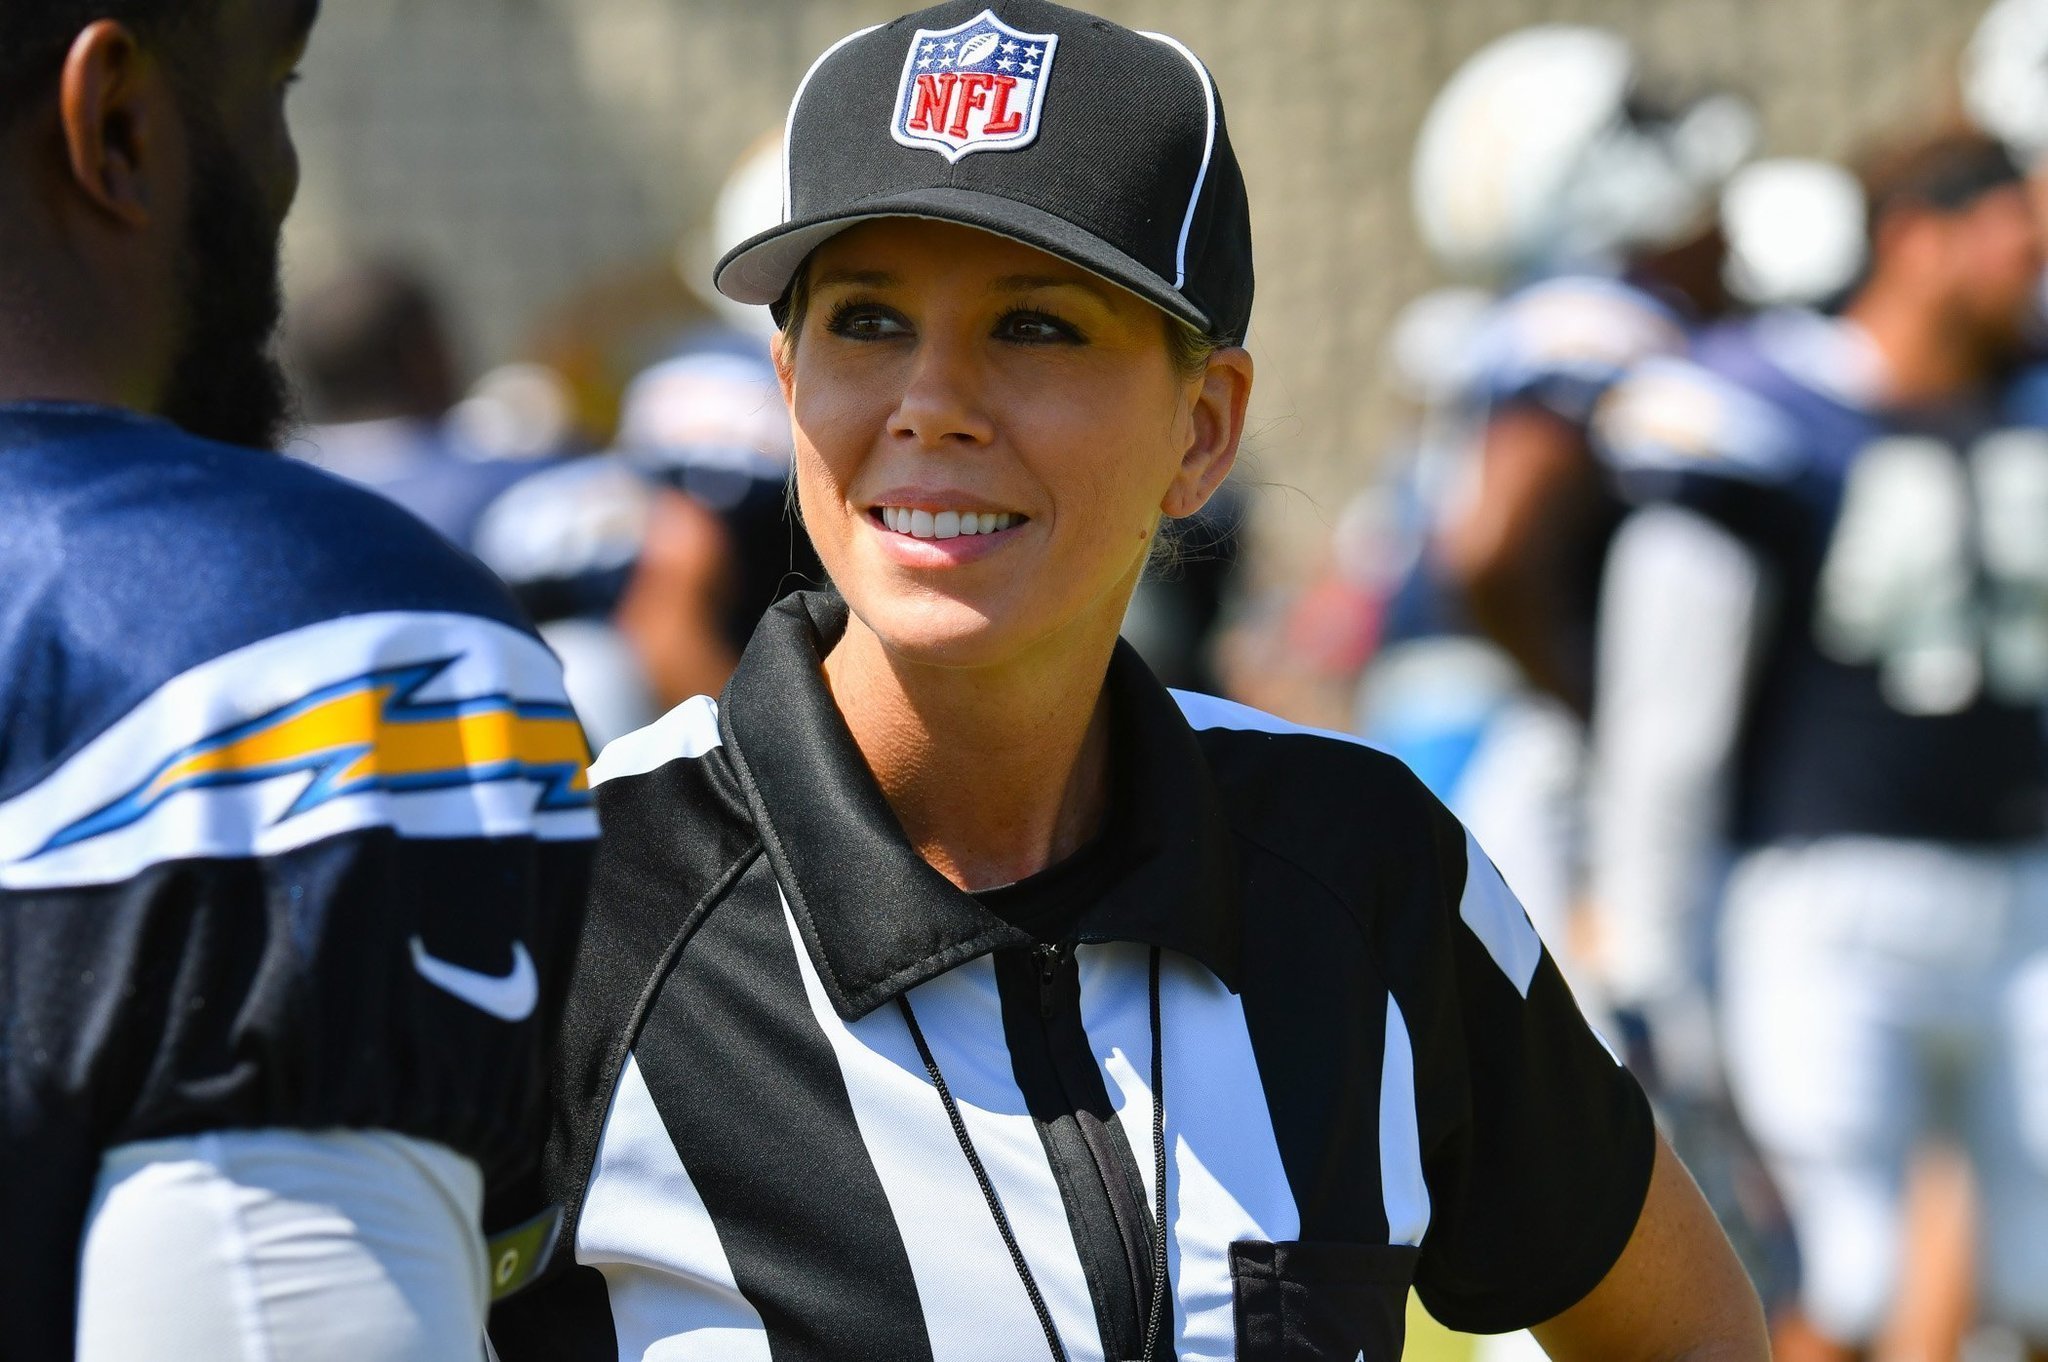 nfl-s-lone-female-official-in-position-to-inspire-the-san-diego-union